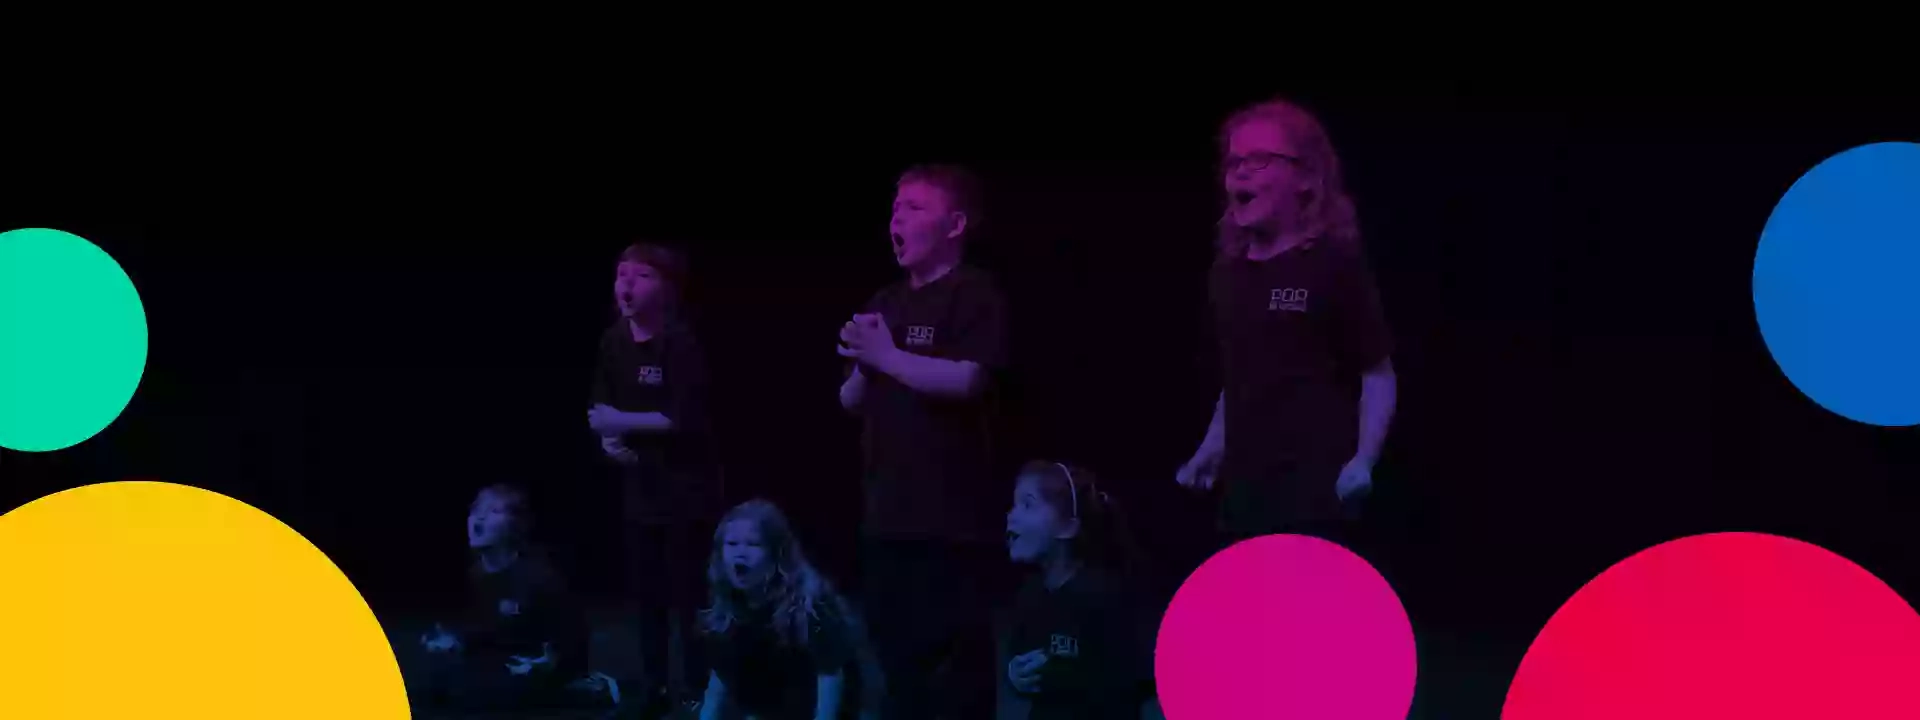 The Pauline Quirke Academy of Performing Arts Loughborough